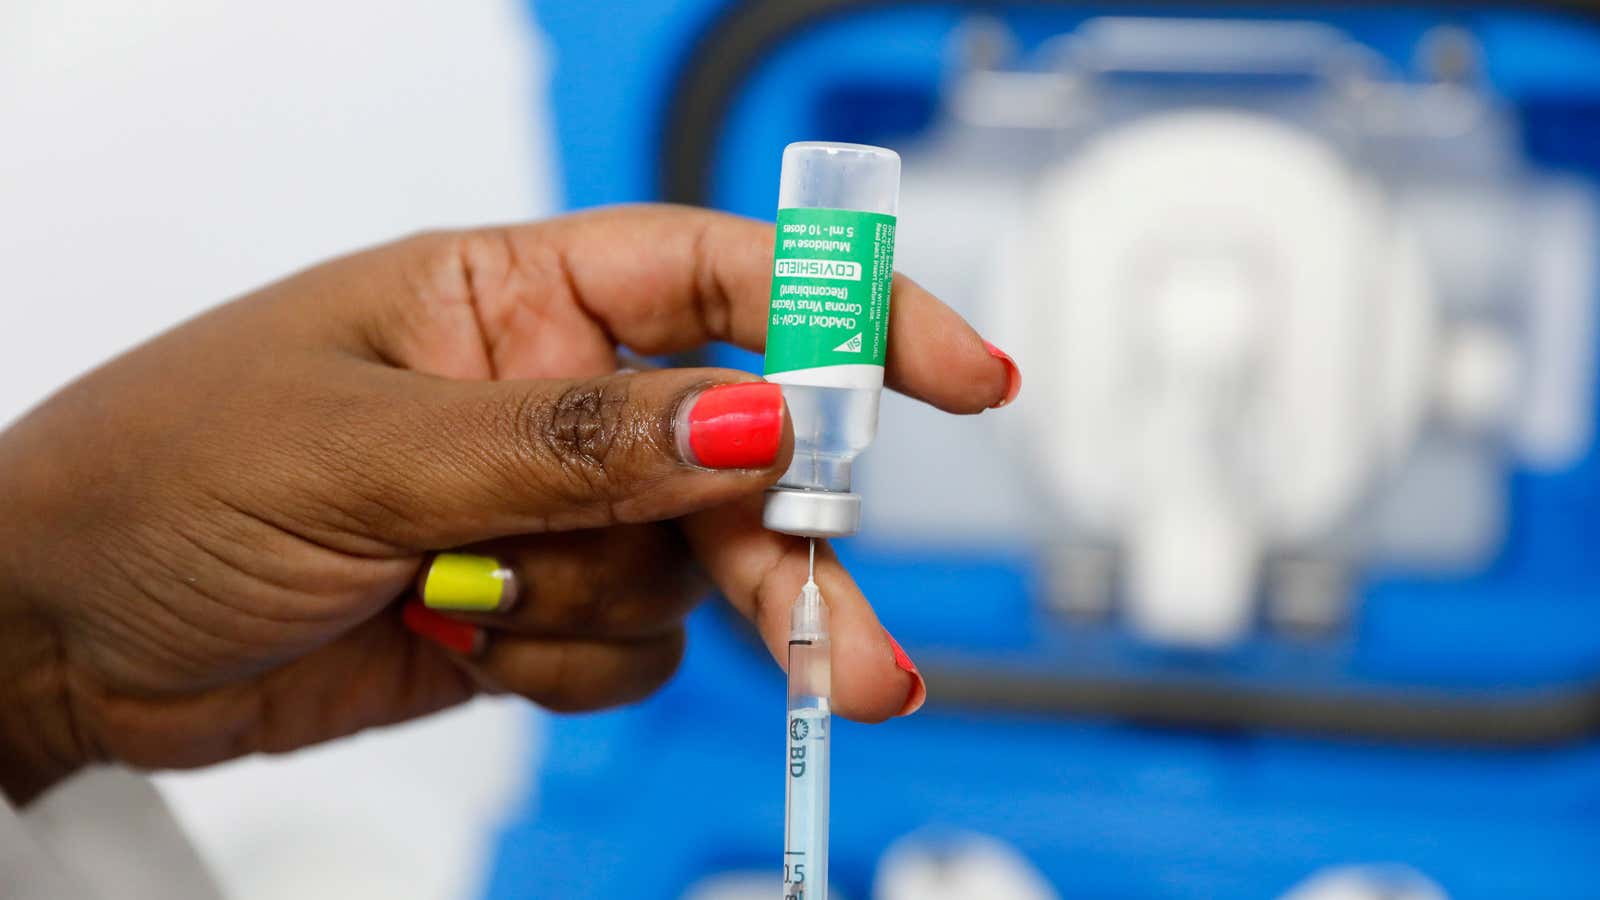 Five African countries have vaccine manufacturing facilities.